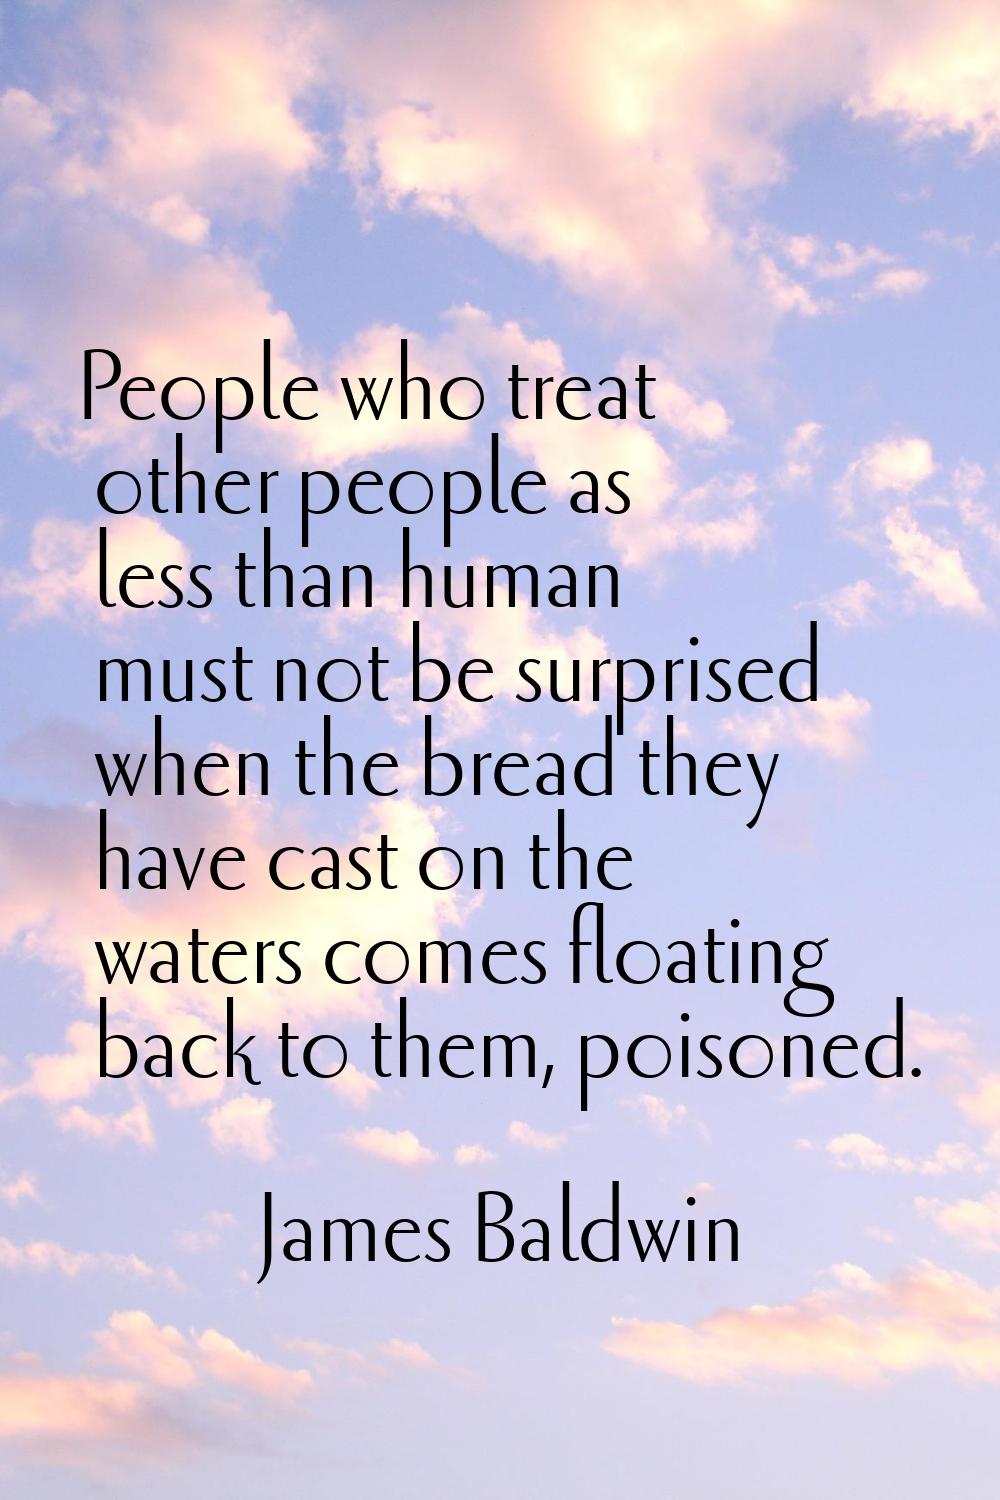 People who treat other people as less than human must not be surprised when the bread they have cas